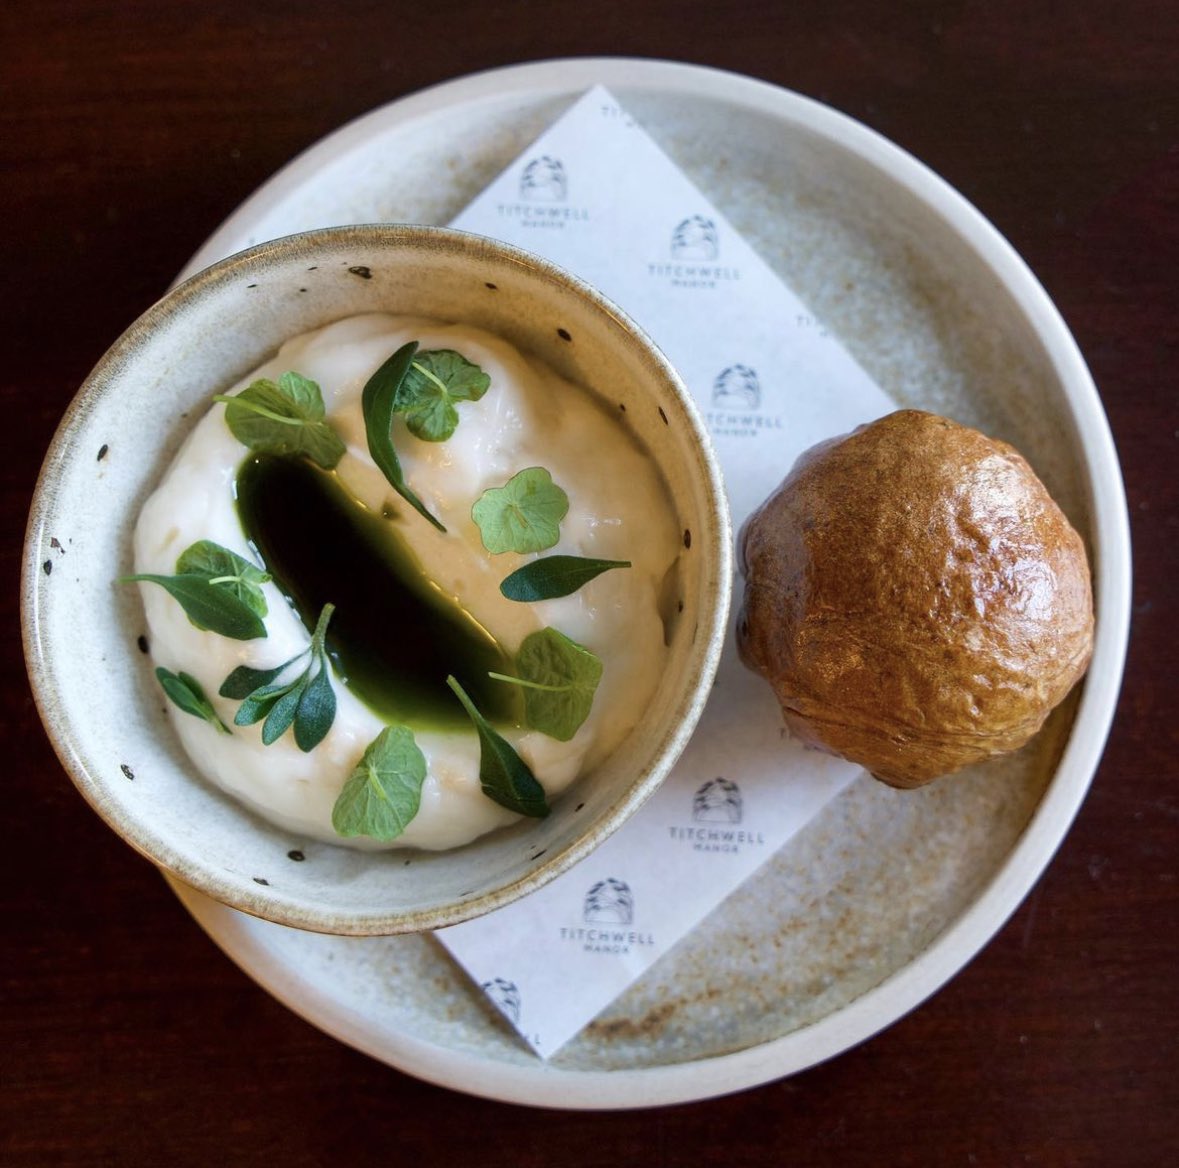 Whipped smoked cod roe, seaweed brioche.

An afternoon snack that hits the spot. Available on our light lunch menu, served daily, 11:30am-4.30pm.

#aahospitality #michelinrestaurant #norfolkfood